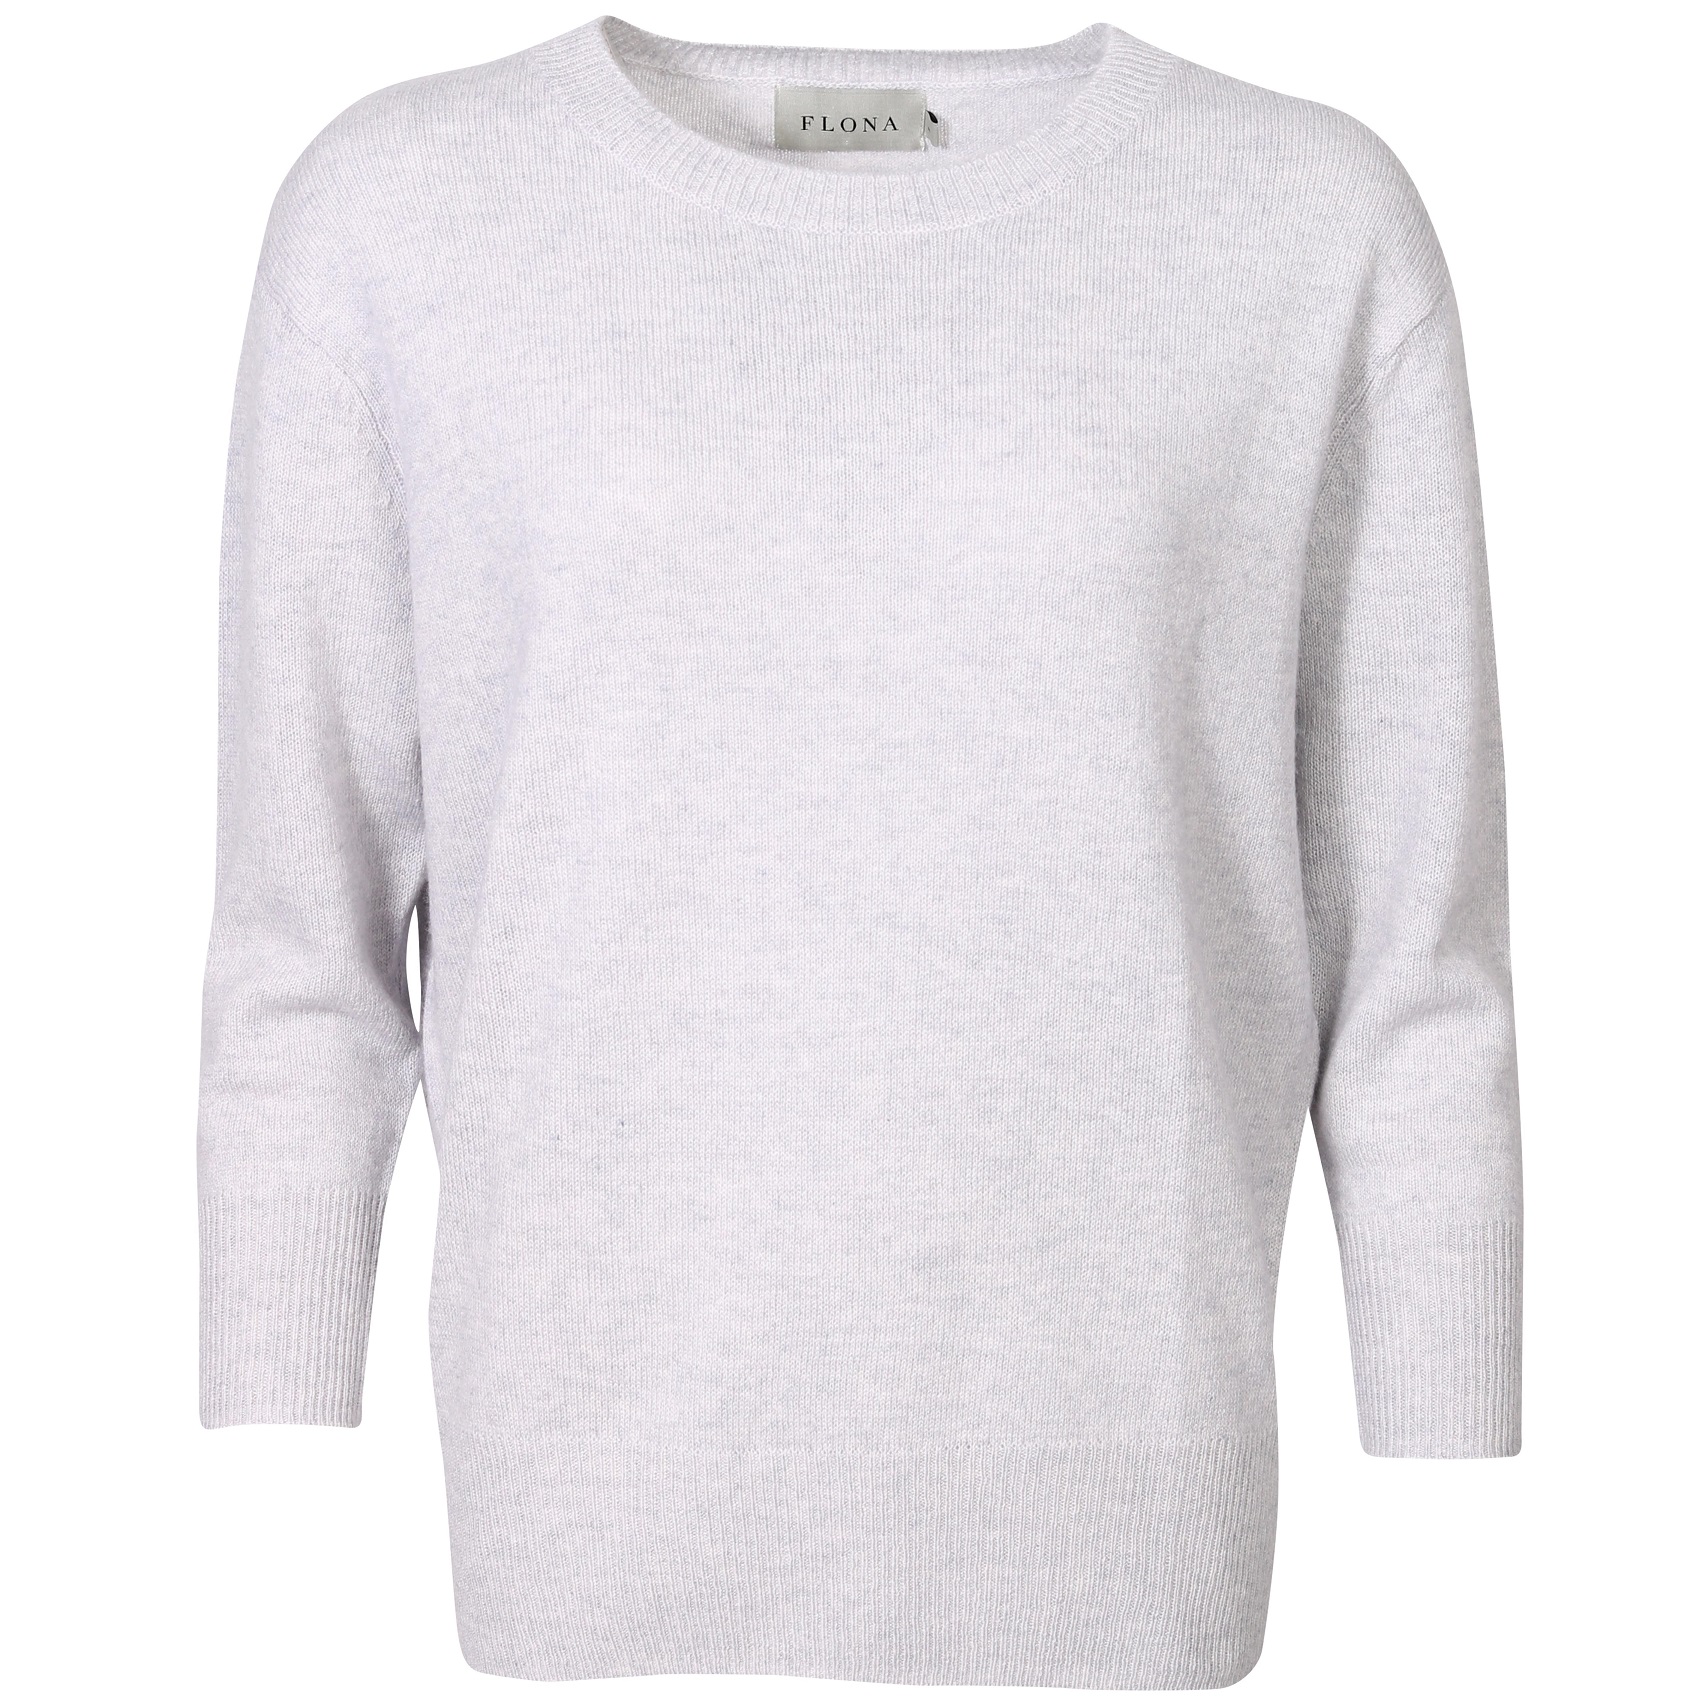 FLONA Cashmere Pullover in Light Grey XL